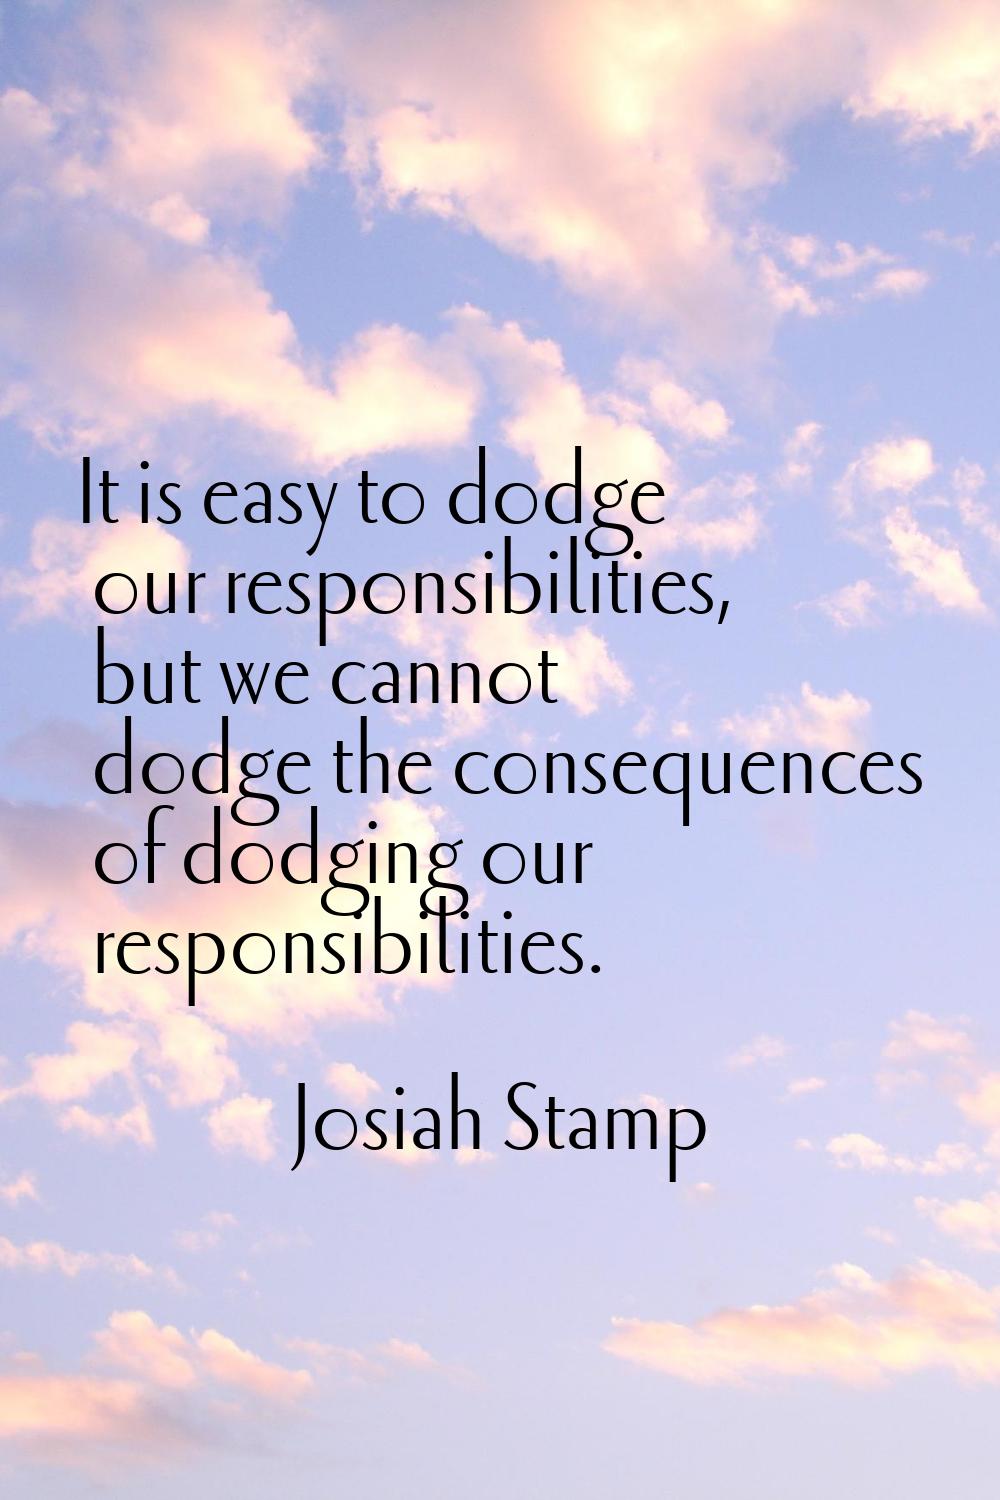 It is easy to dodge our responsibilities, but we cannot dodge the consequences of dodging our respo